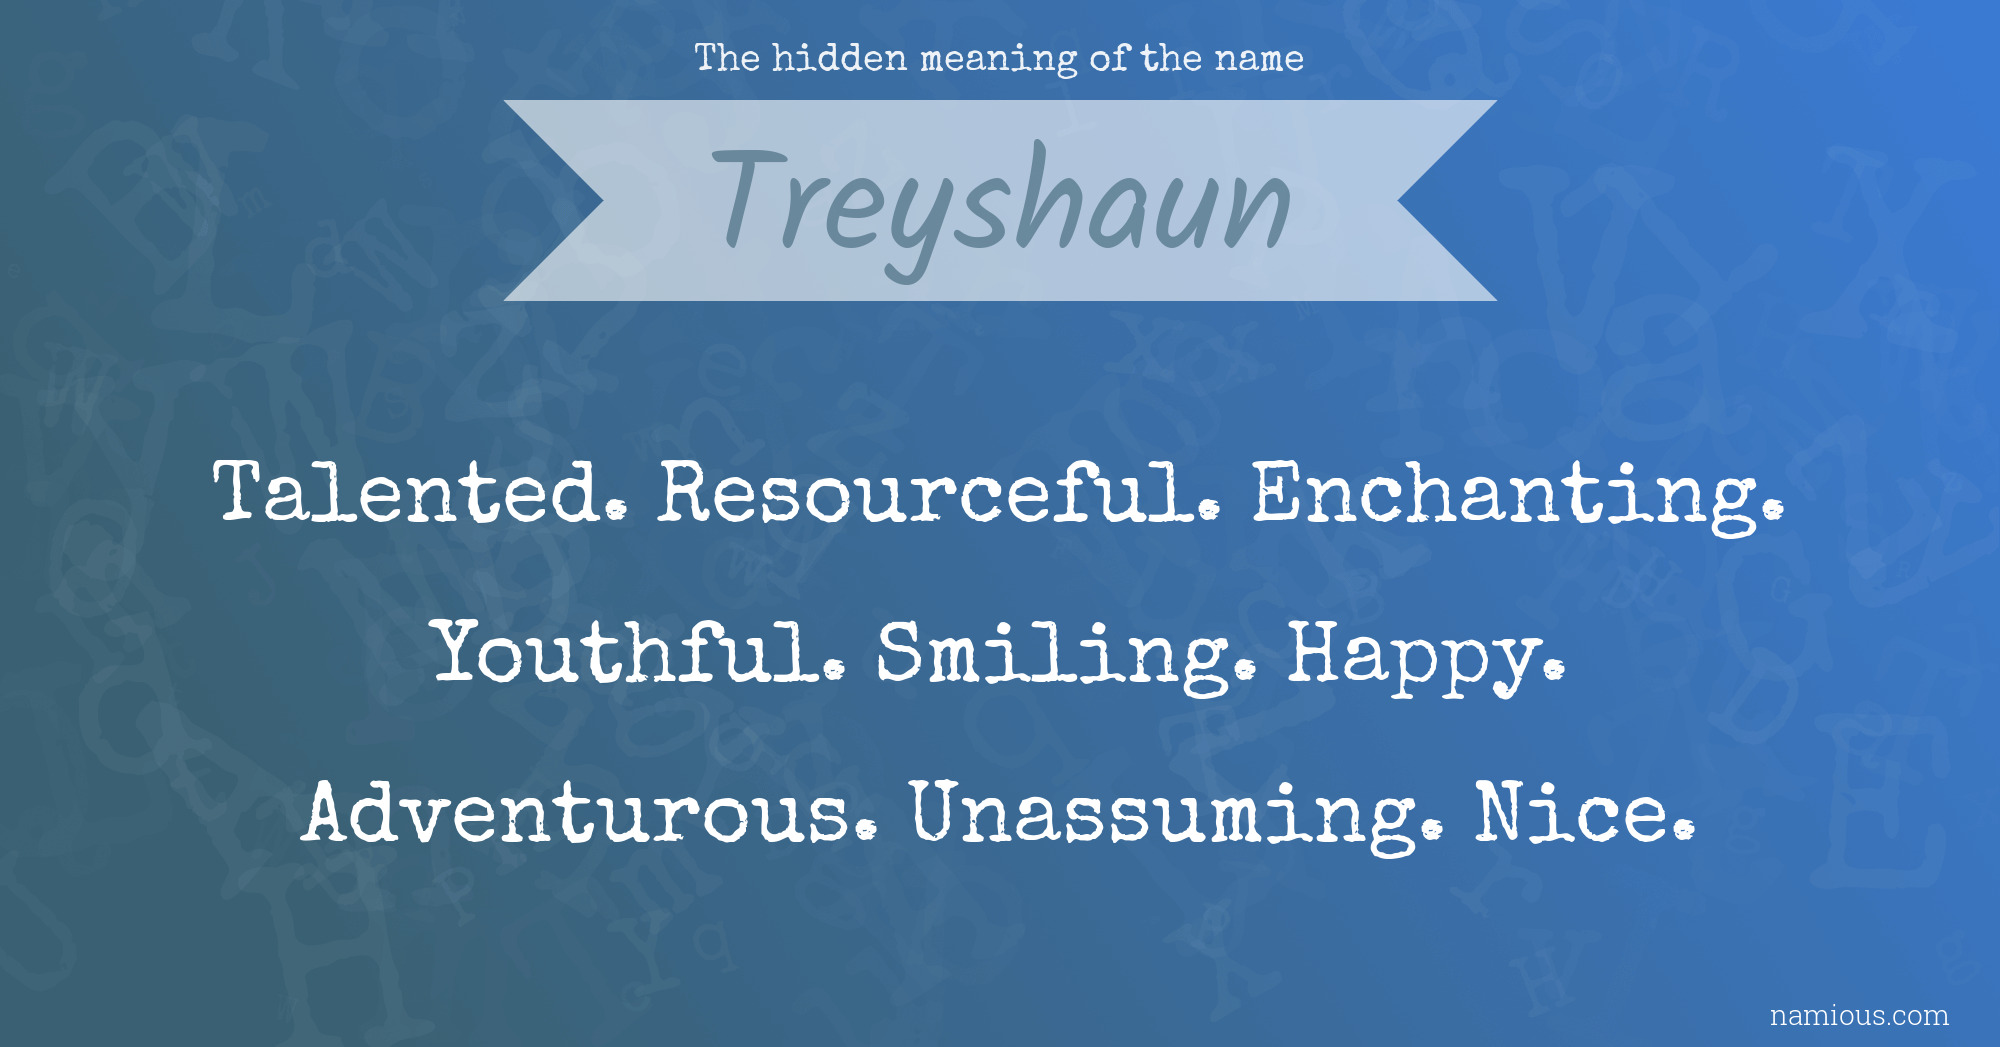 The hidden meaning of the name Treyshaun